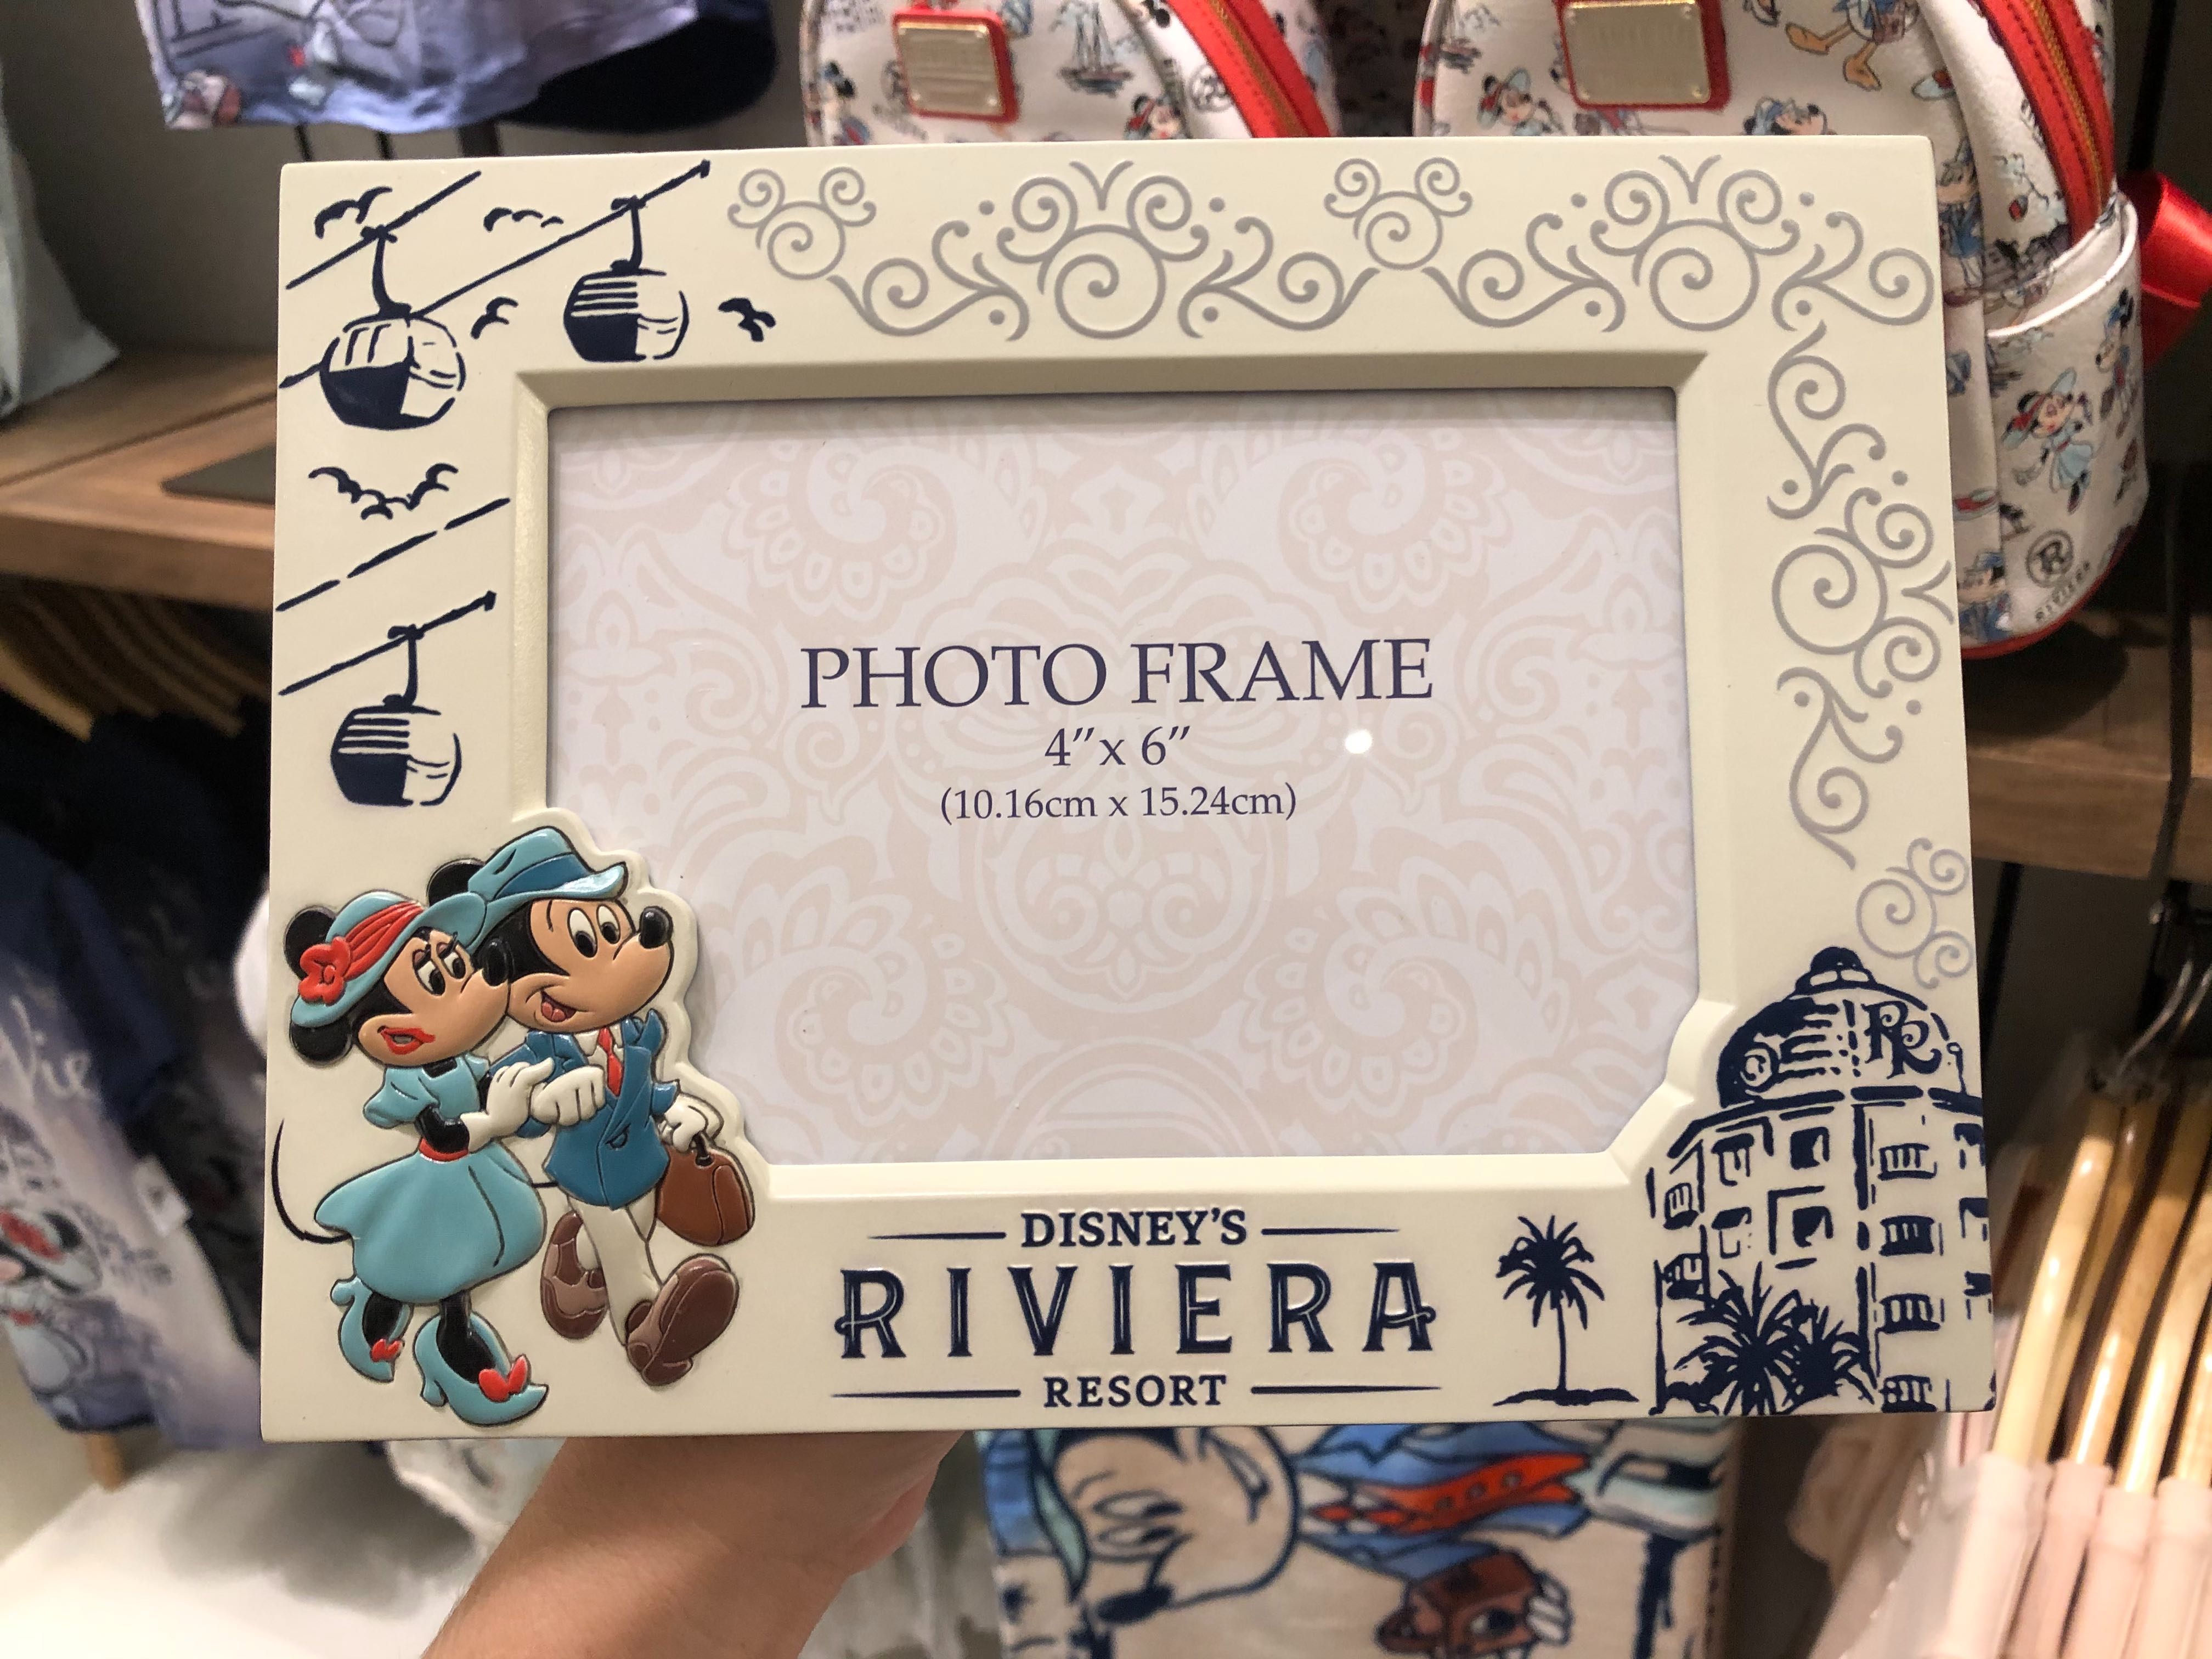 Riviera Resort Mickey and Minnie Mouse Picture Frame - $19.99